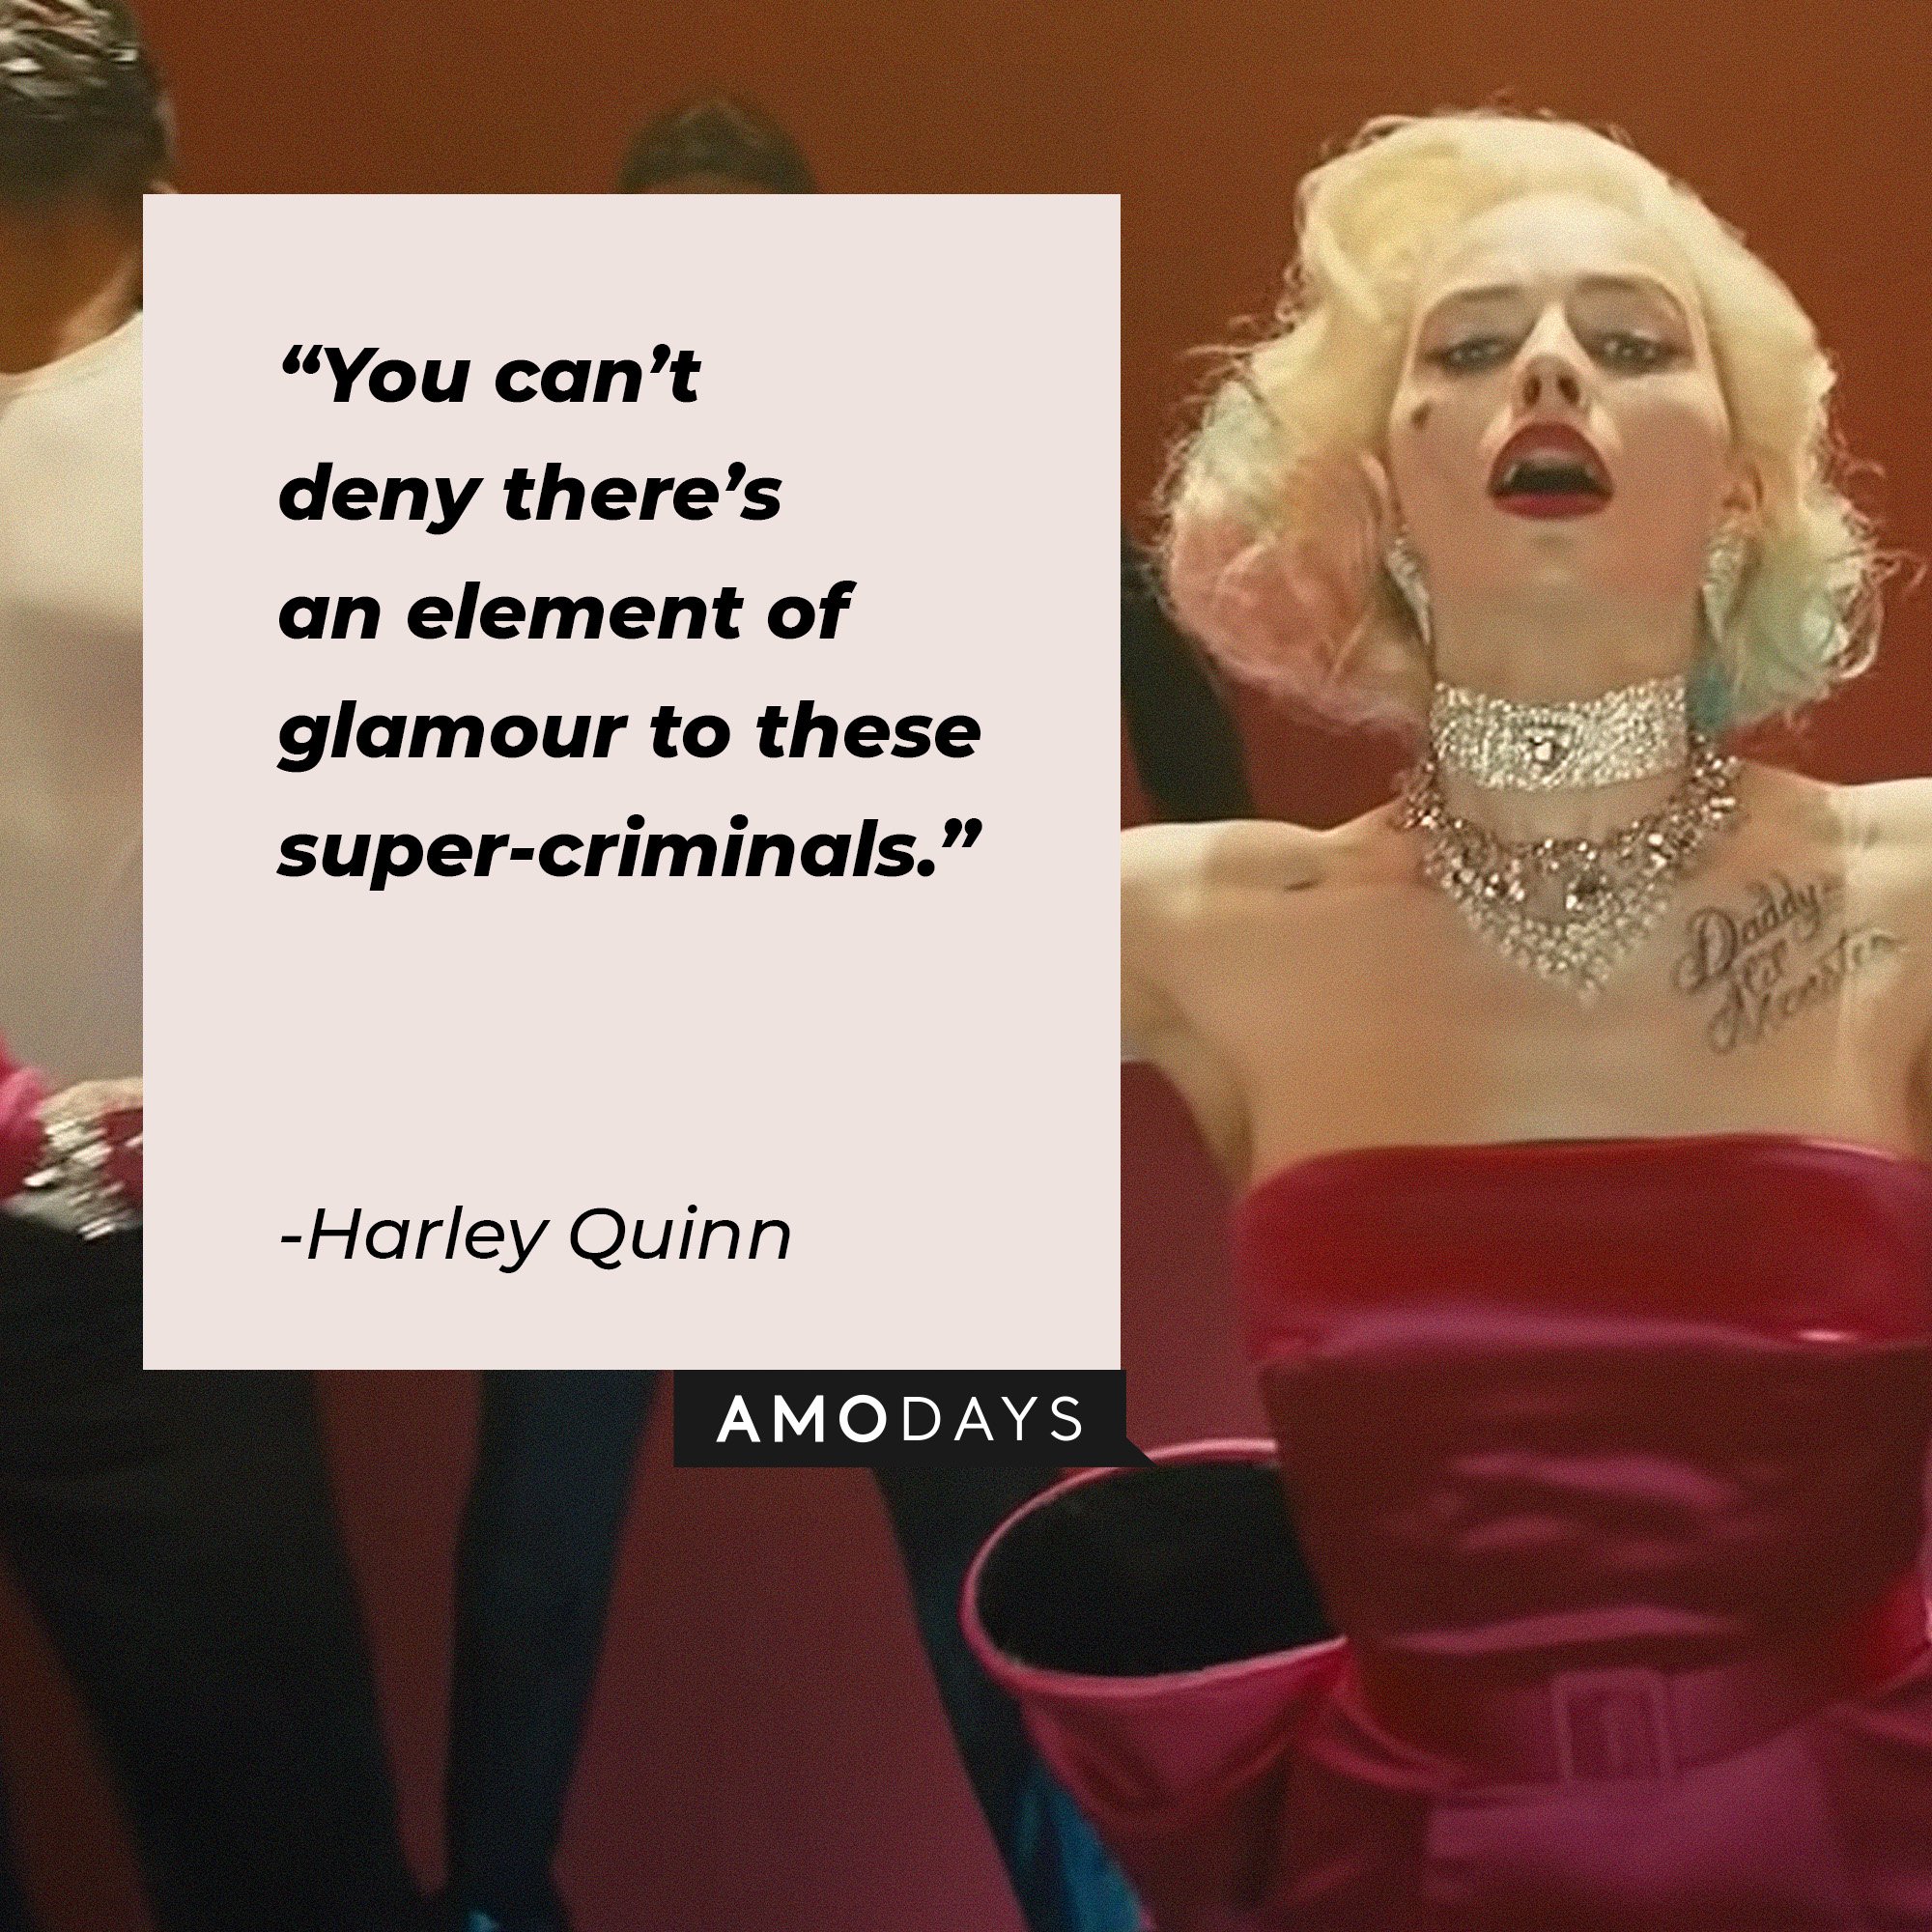 Harley Quinn’s quote: “You can’t deny there’s an element of glamour to these super-criminals.” | Source: Image: AmoDays